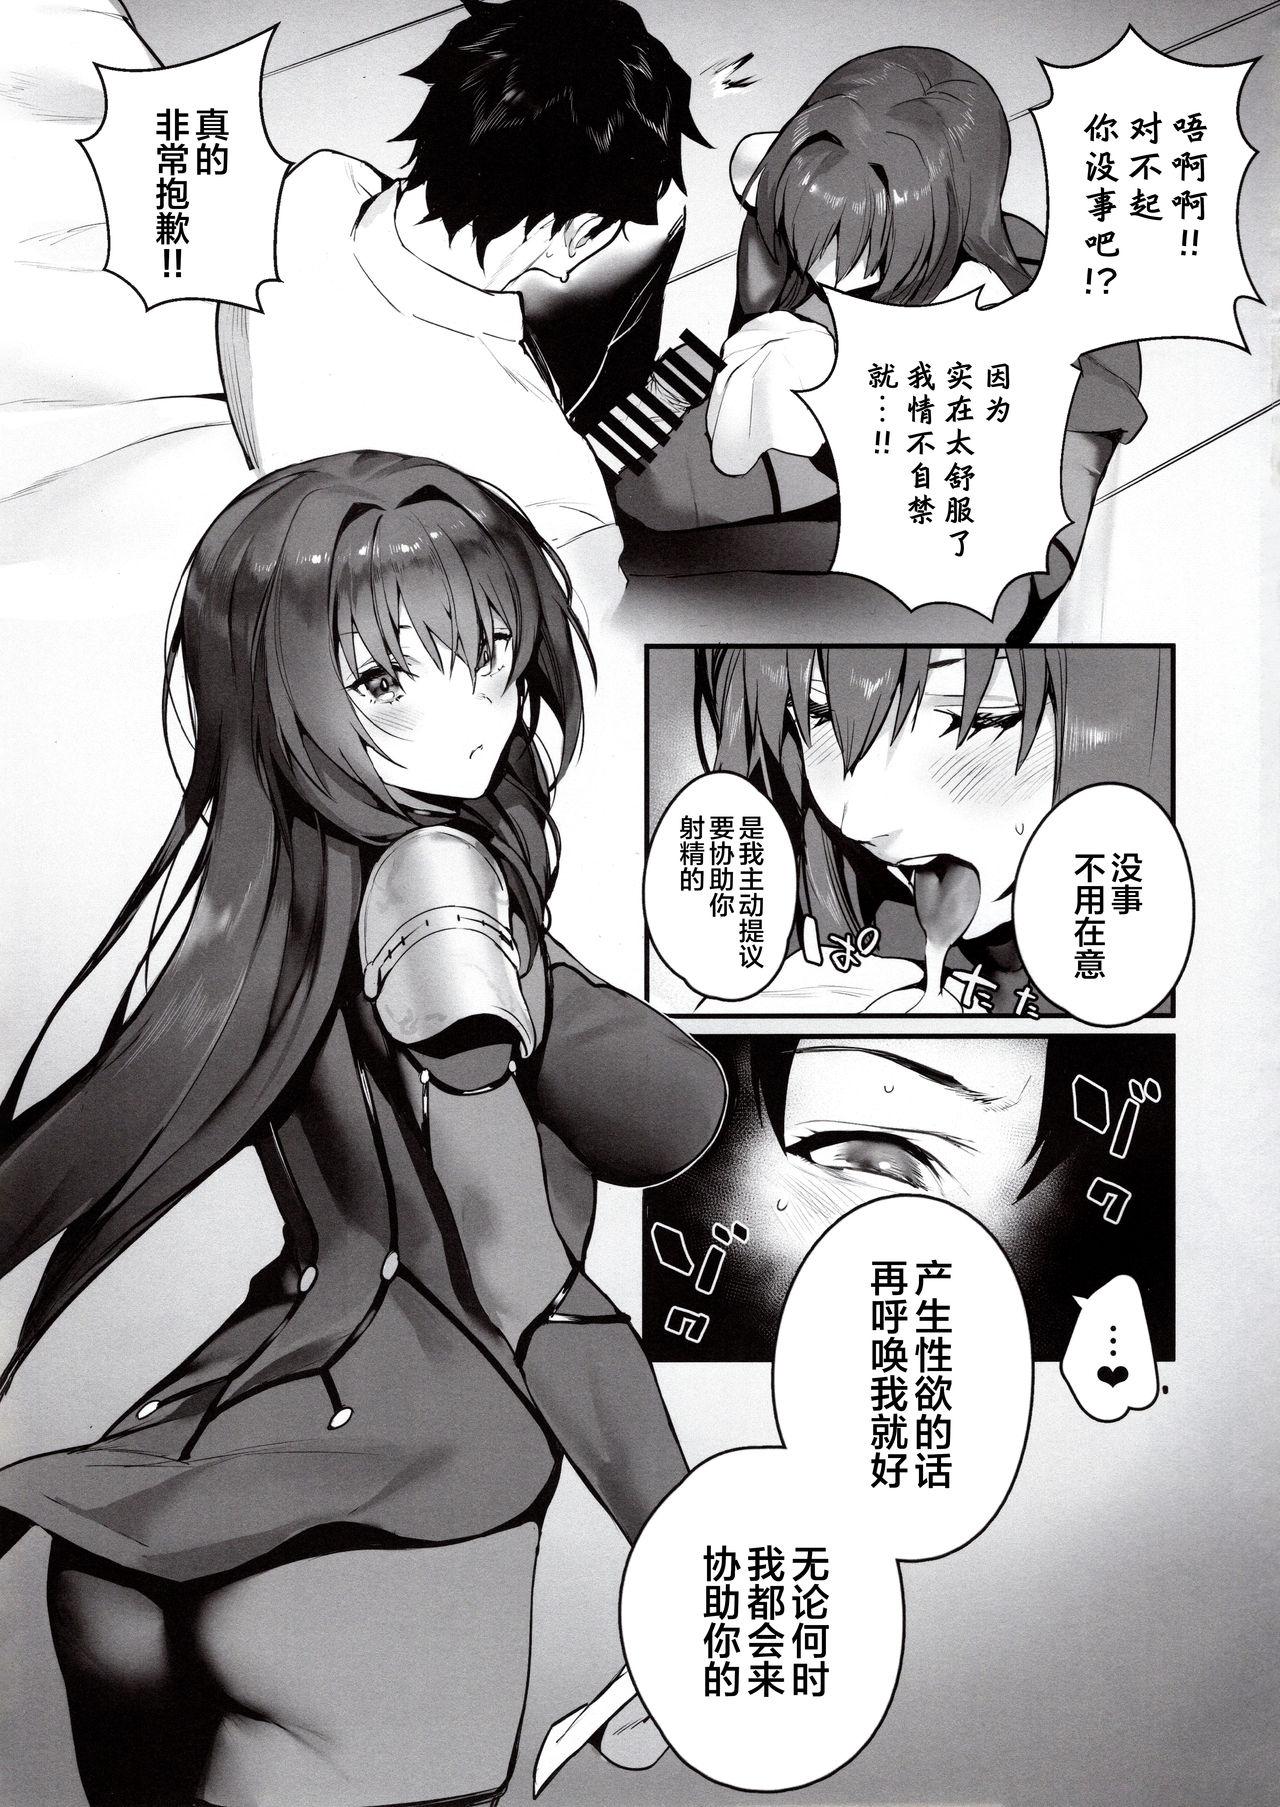 Best Blowjob MOVE ON UP - Fate grand order Affair - Page 6